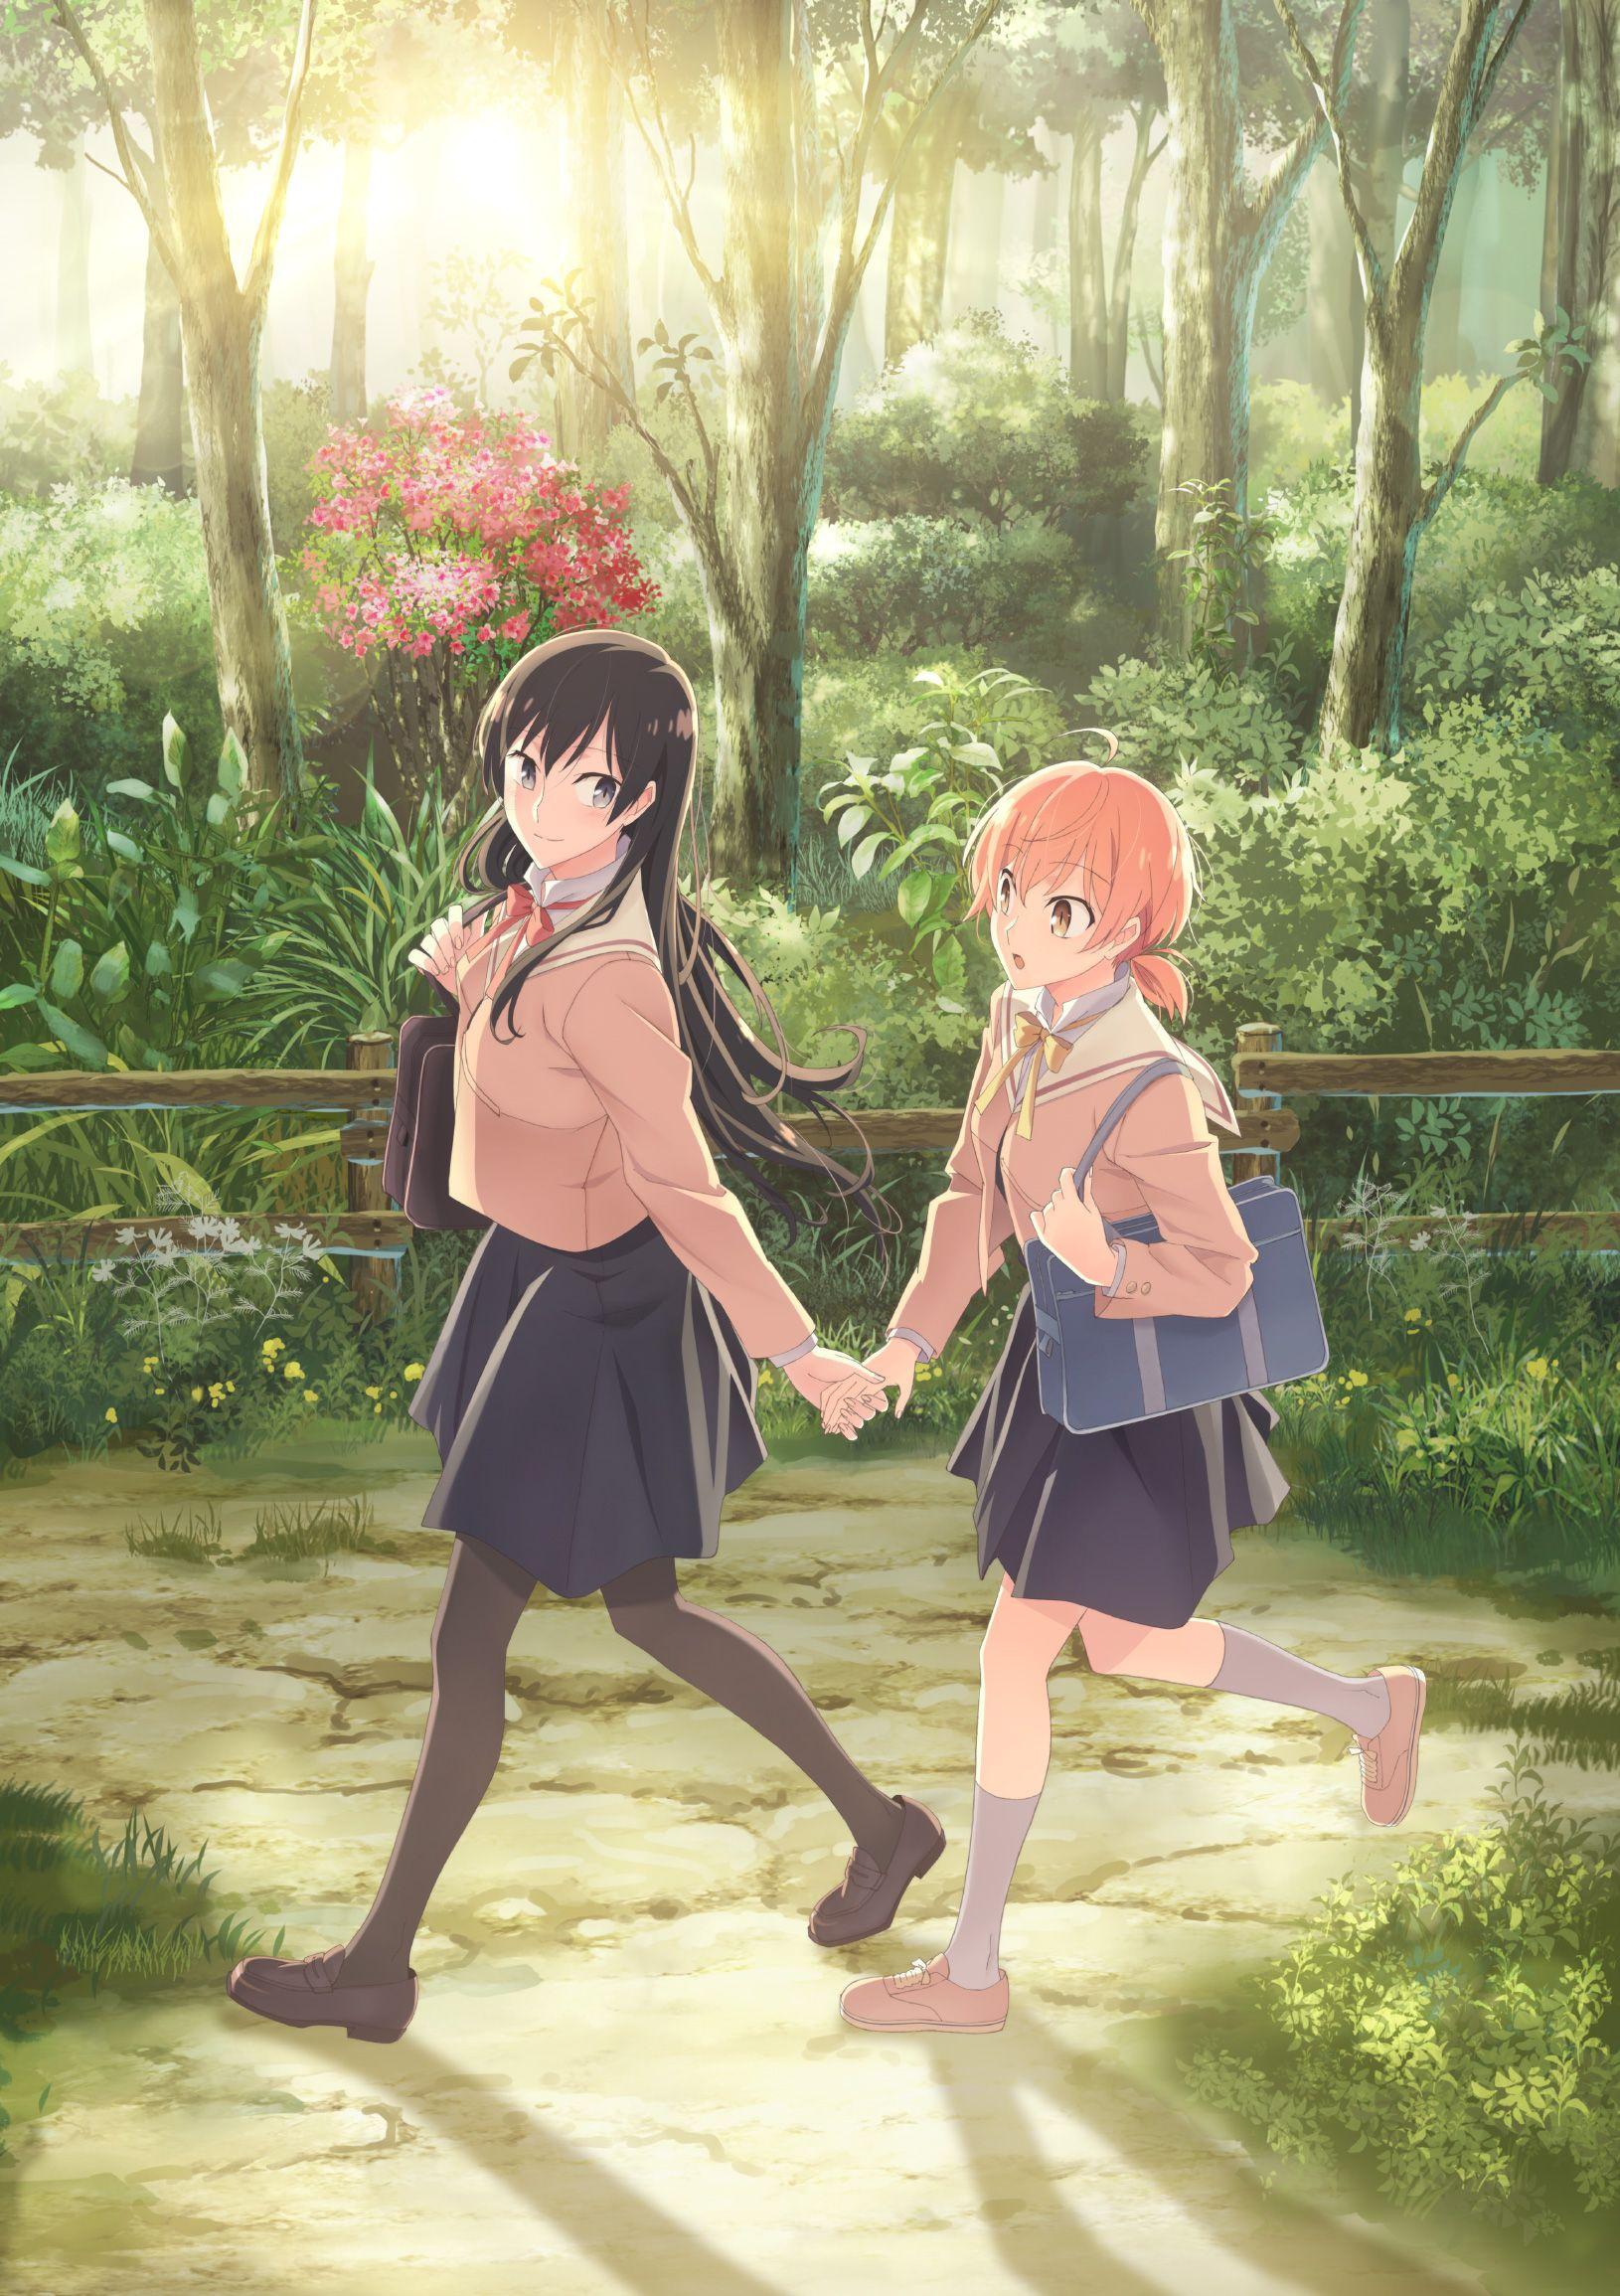 Bloom Into You Wallpaper Free Bloom Into You Background